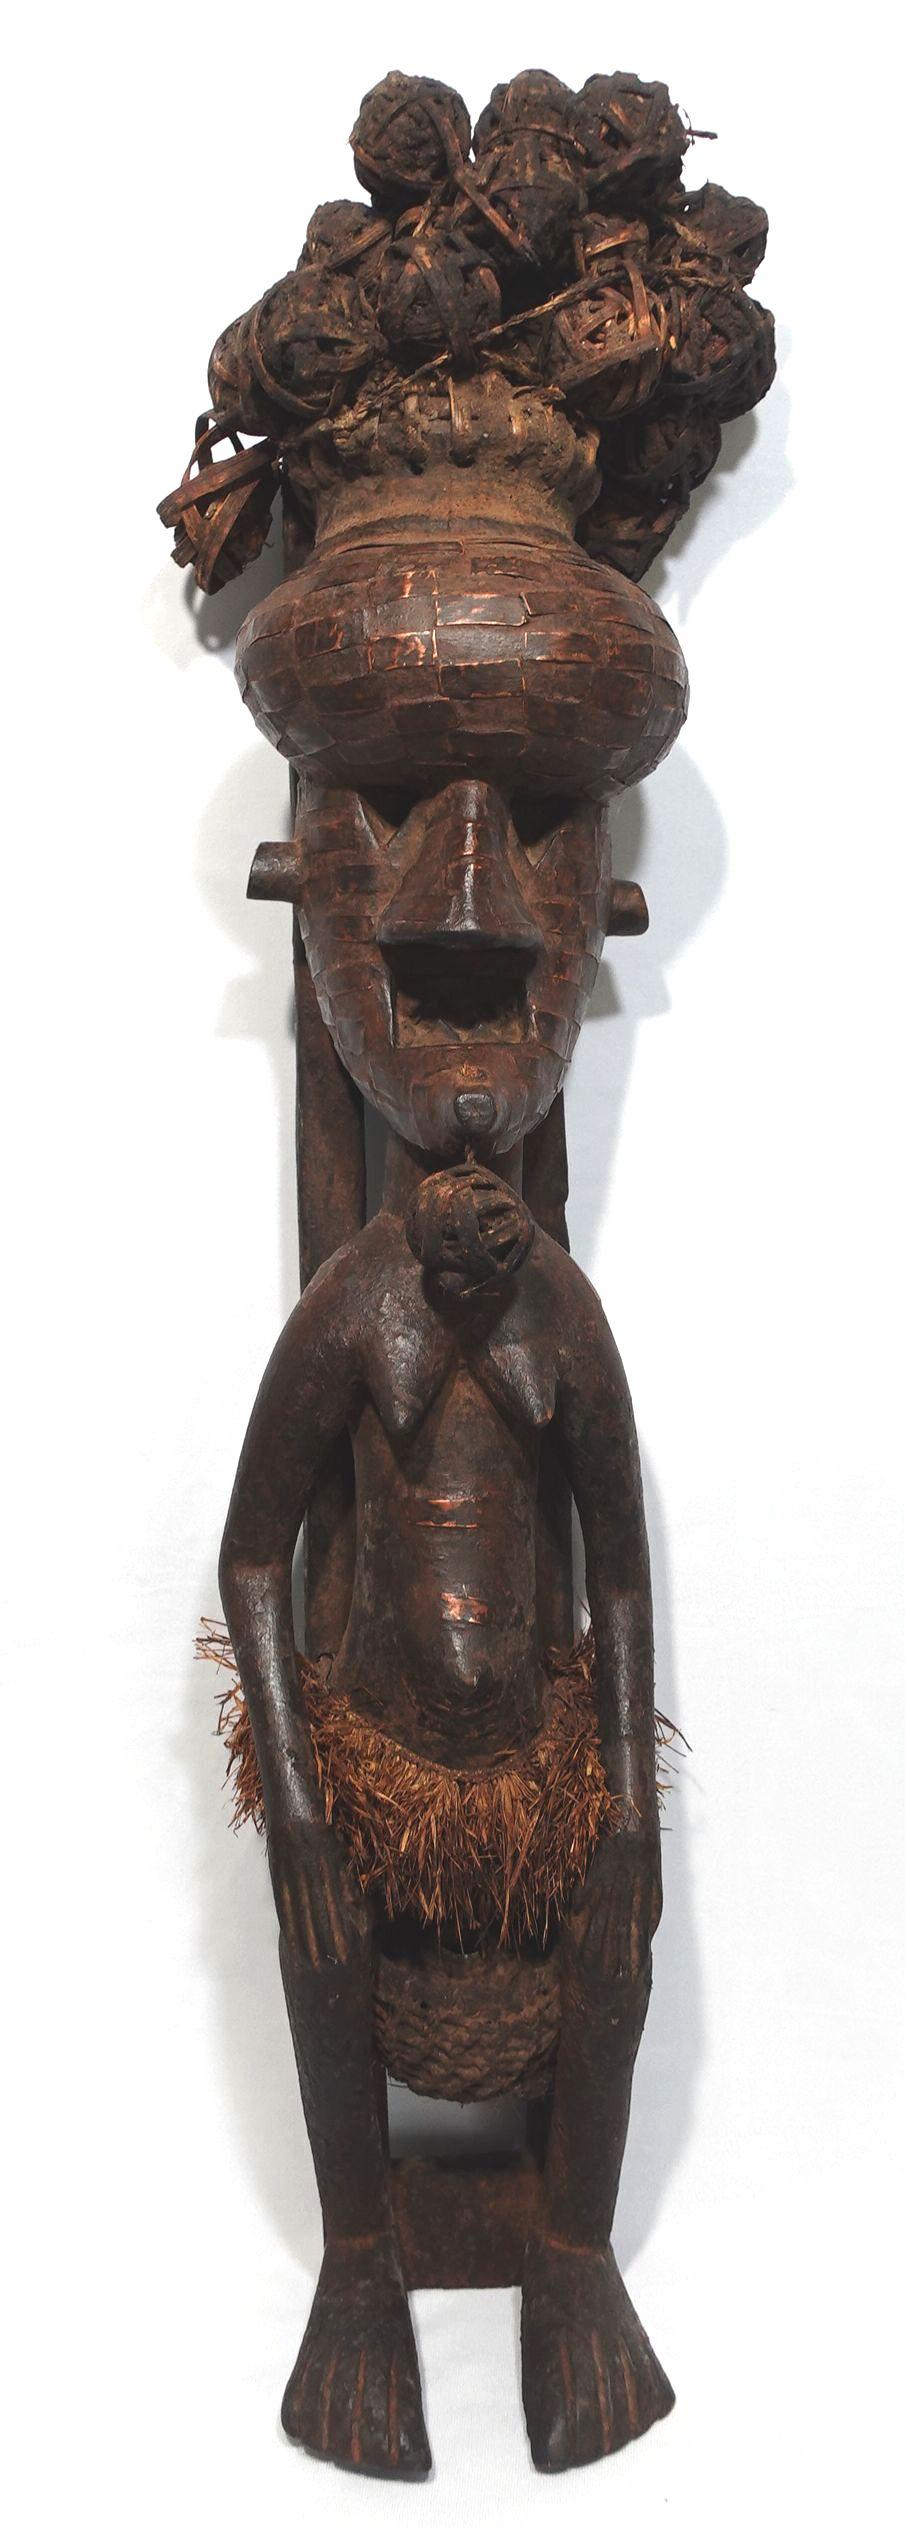 A precious African Art Statue with oven balls for hair, basket weave texture on the face, and wearing a loin cloth. The brass panels are applied on the entire head and face and some on the body. The statue is a very delicate hand-carved figure.